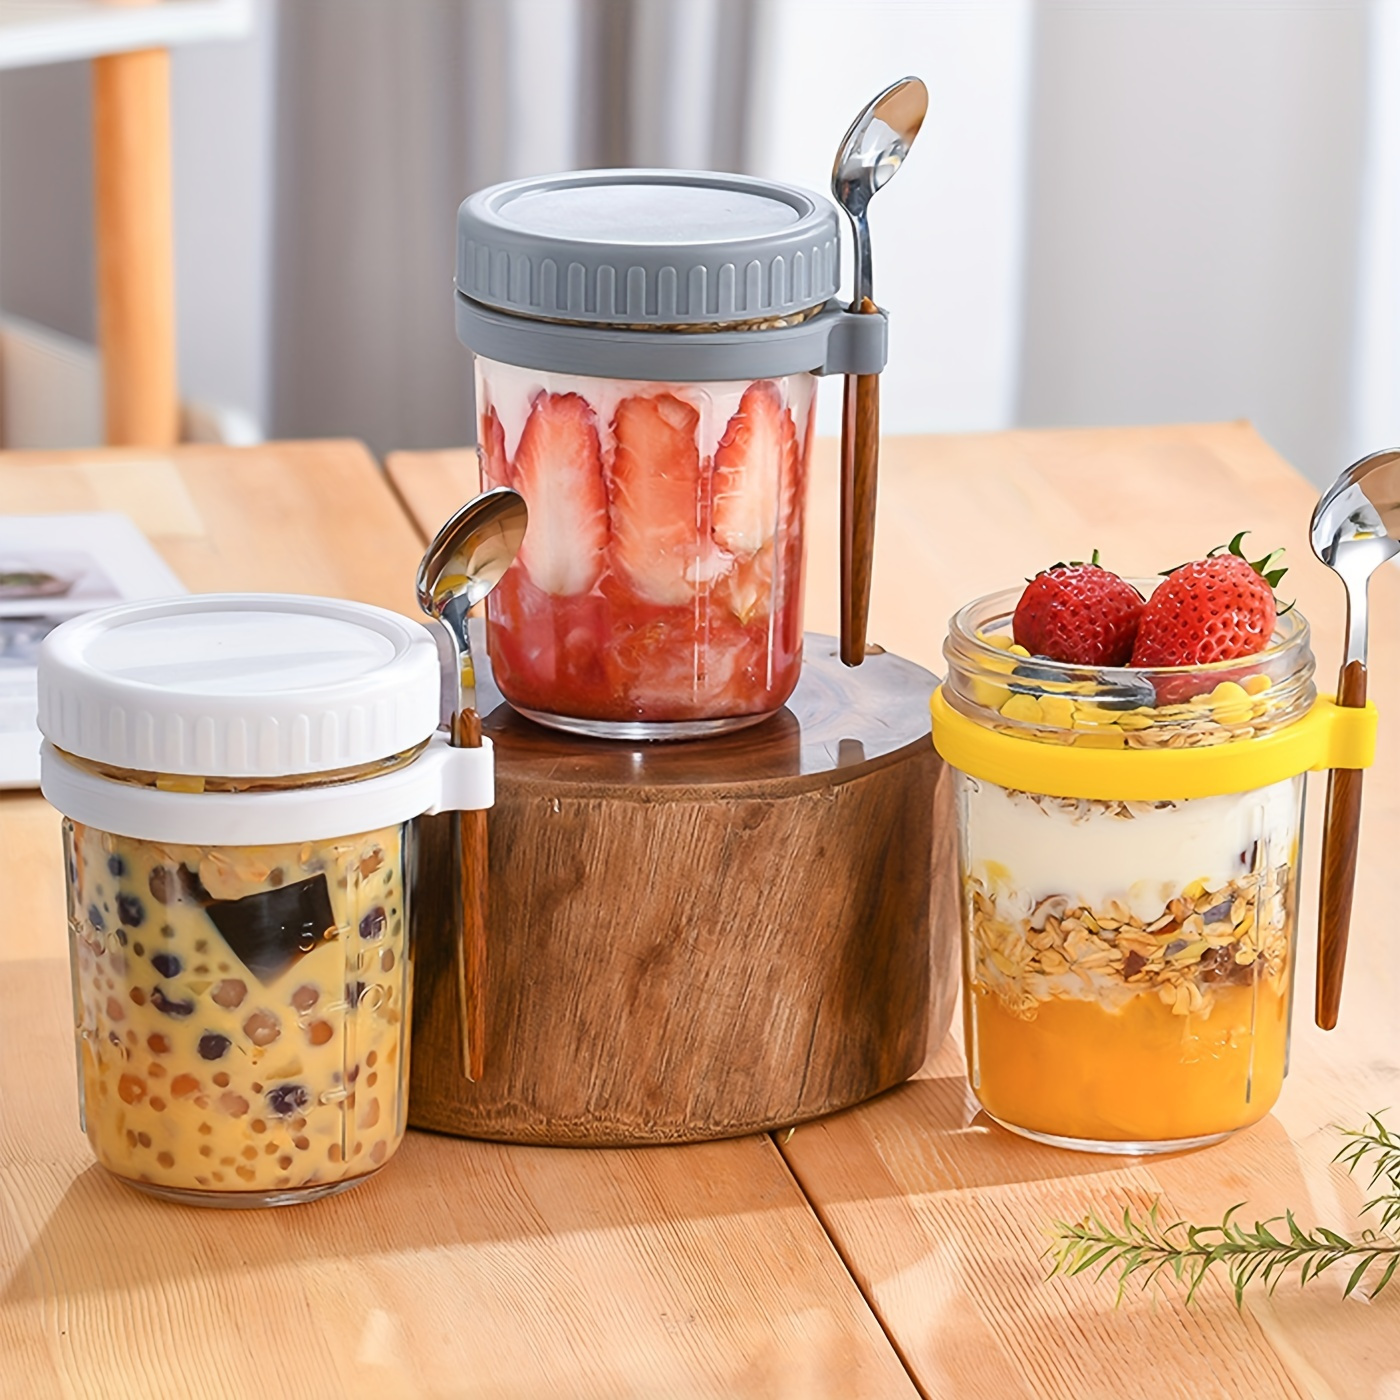 4PCS Overnight Oats Container with Lid and Spoon, 14oz Wide Mason Jar,  Reusable Meal Prep Container, Small Glass Container Jar, Food Storage  Container